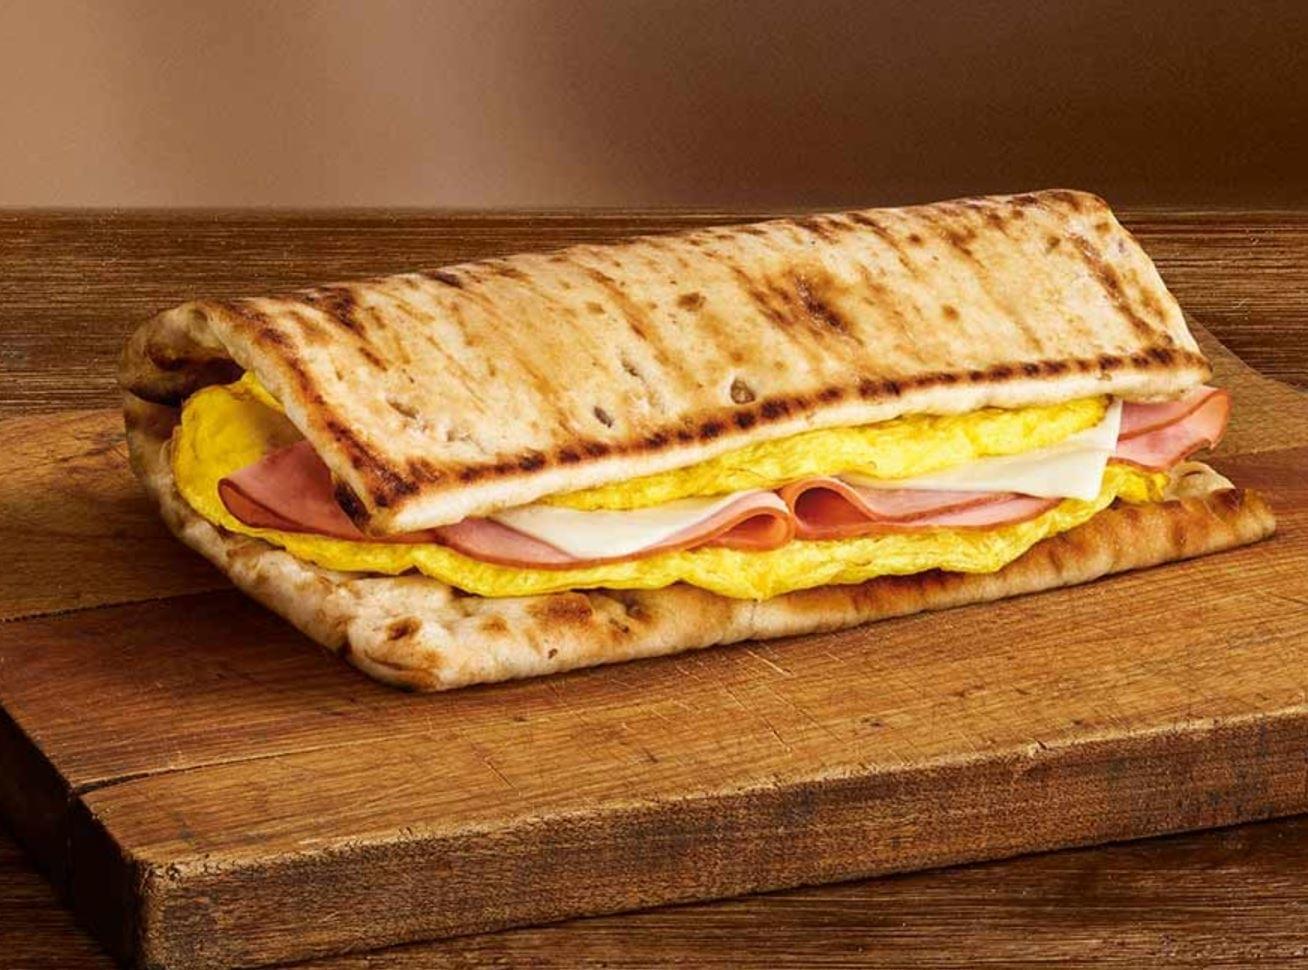 Subway Black Forest Ham, Egg White & Cheese on Flatbread Nutrition Facts